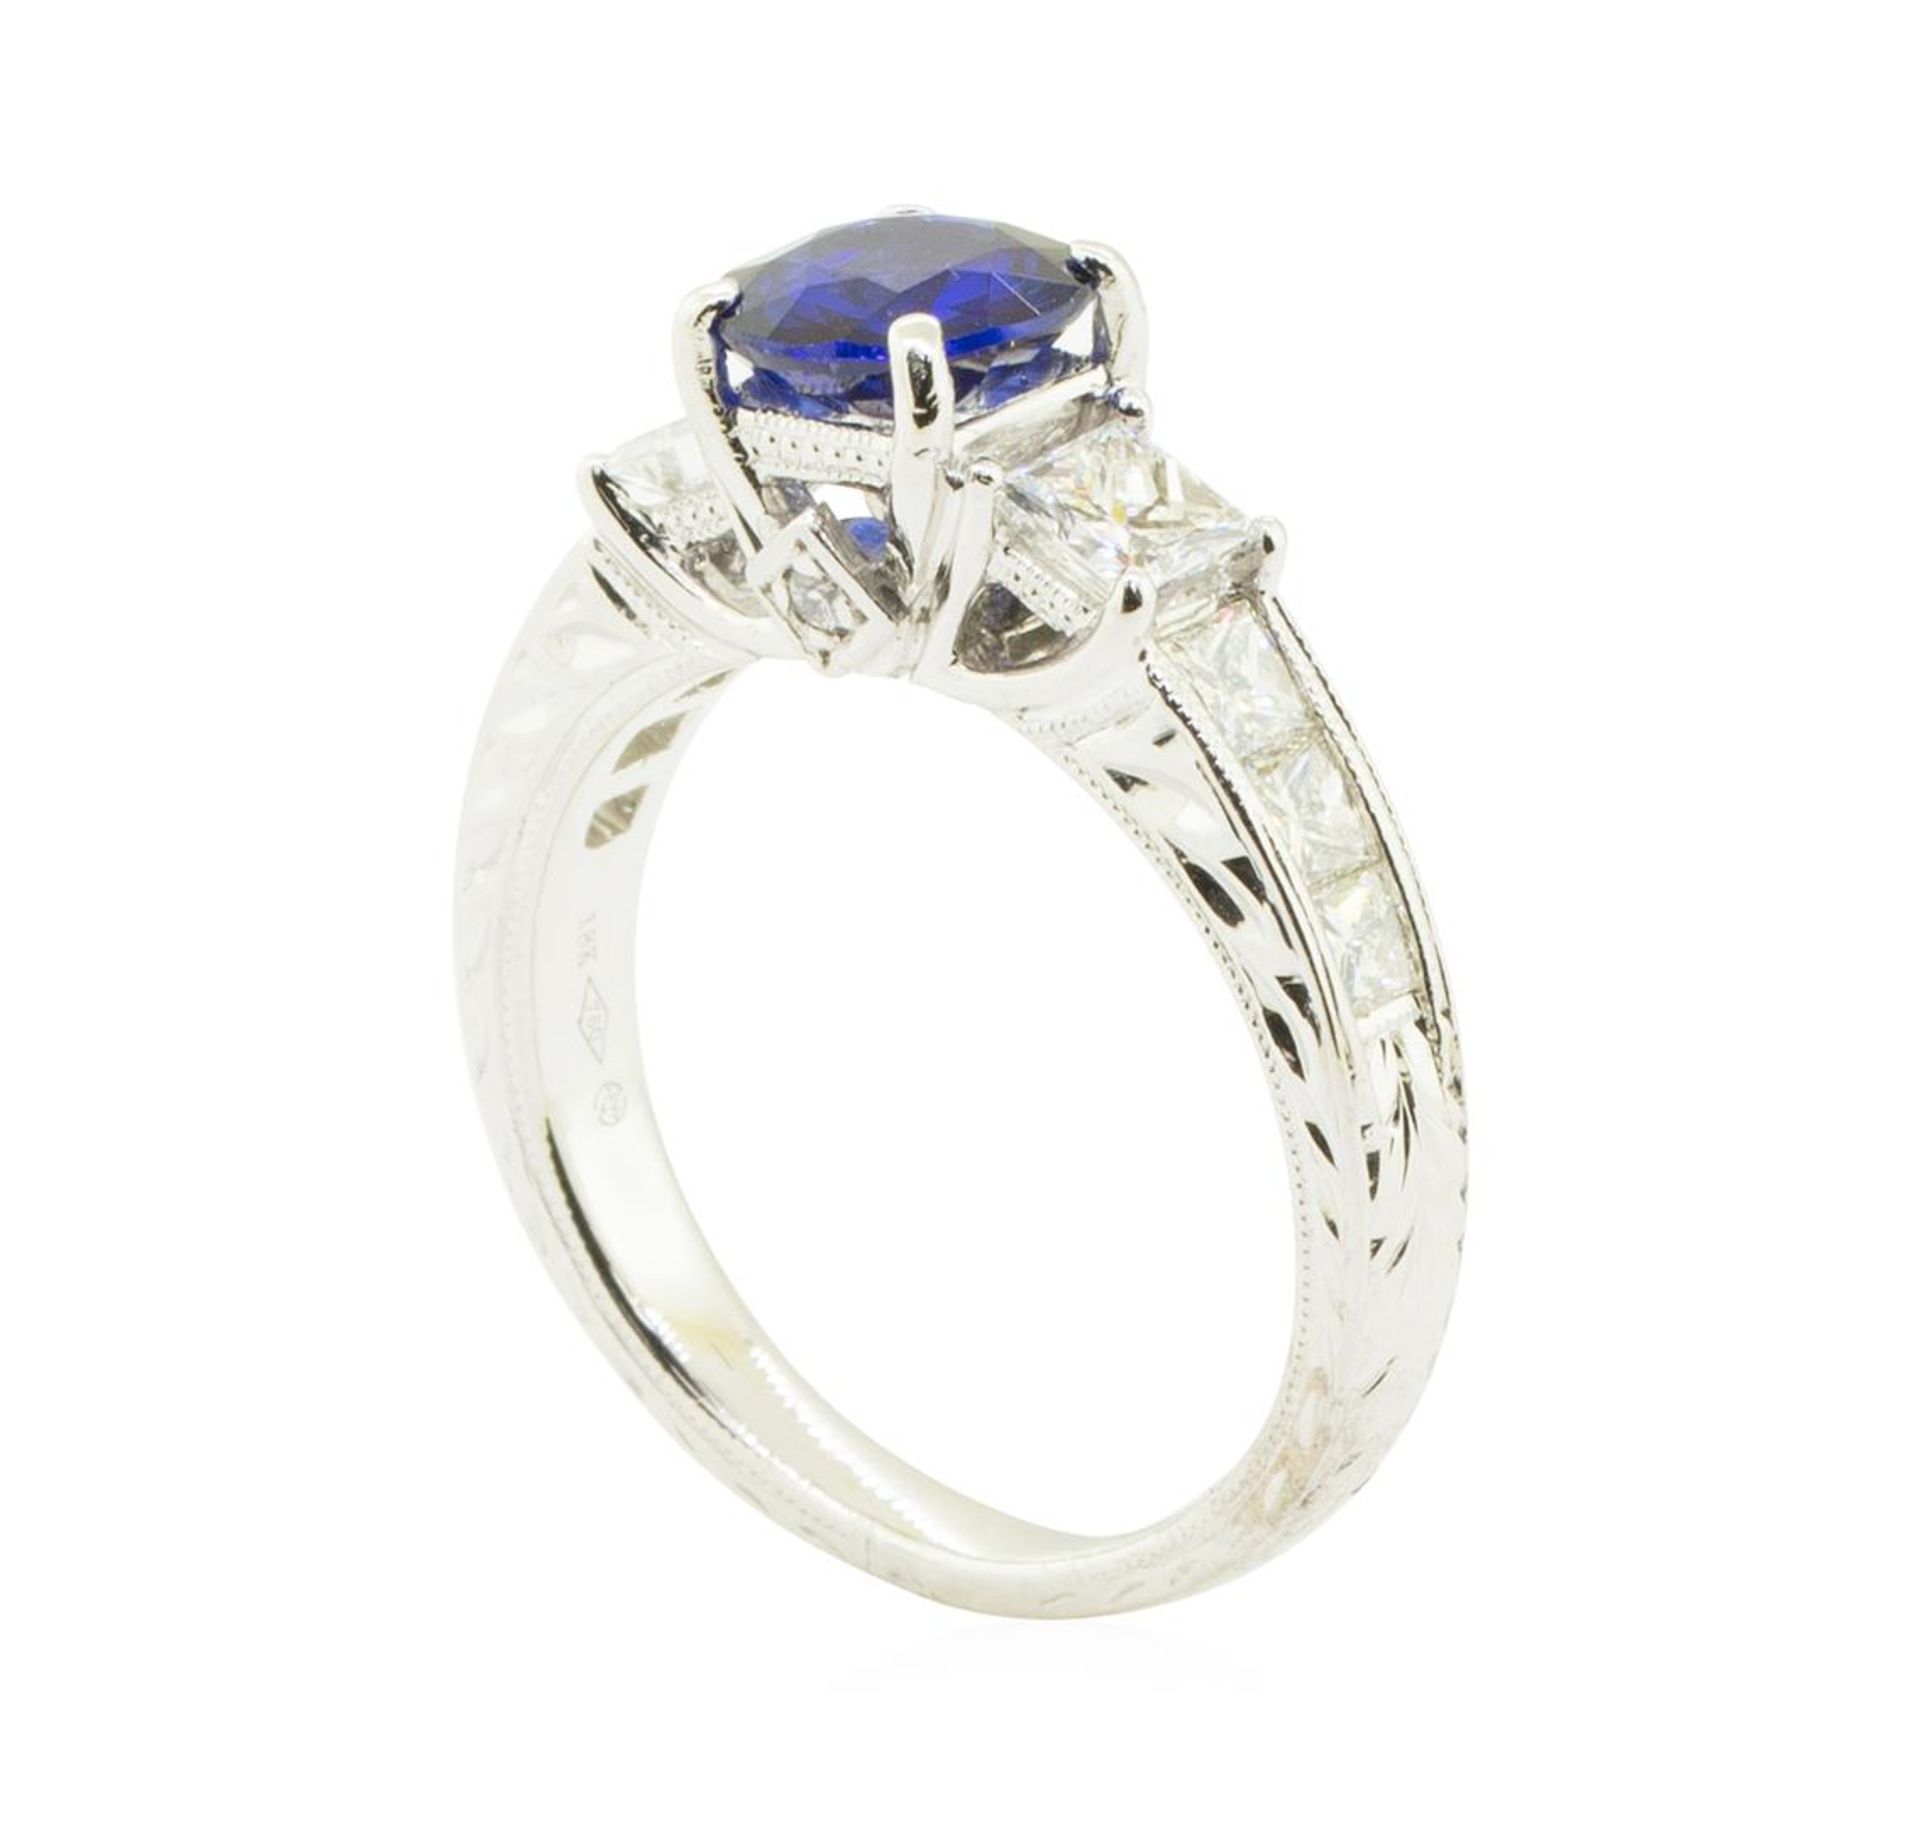 2.38 ctw Round Brilliant Blue Sapphire And Diamond Ring - 18KT White Gold - Image 4 of 5